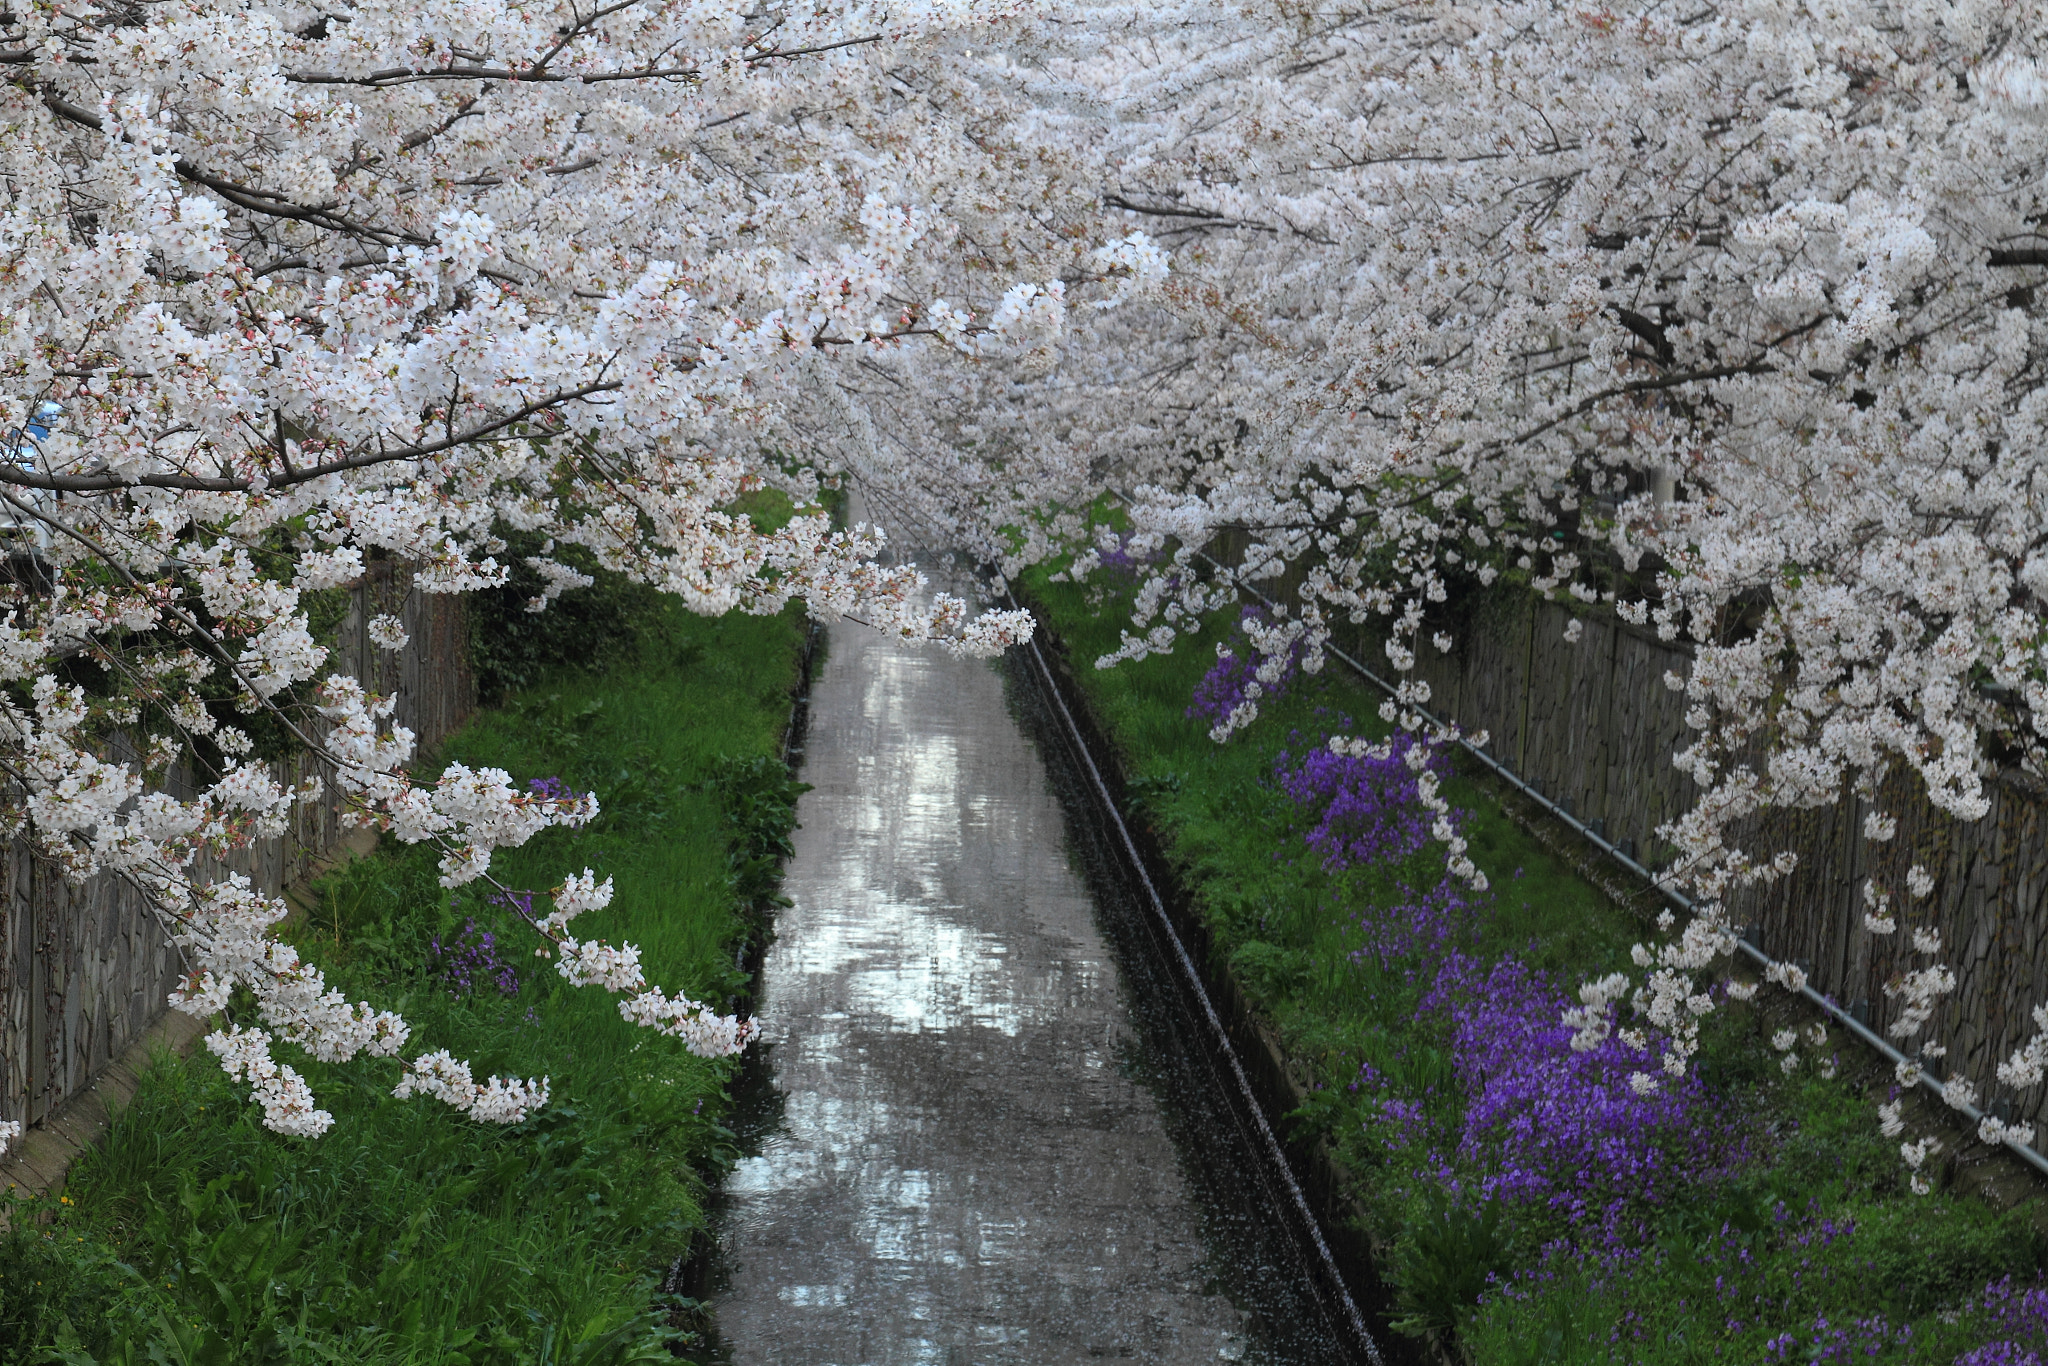 Tunnel of cherry blossoms